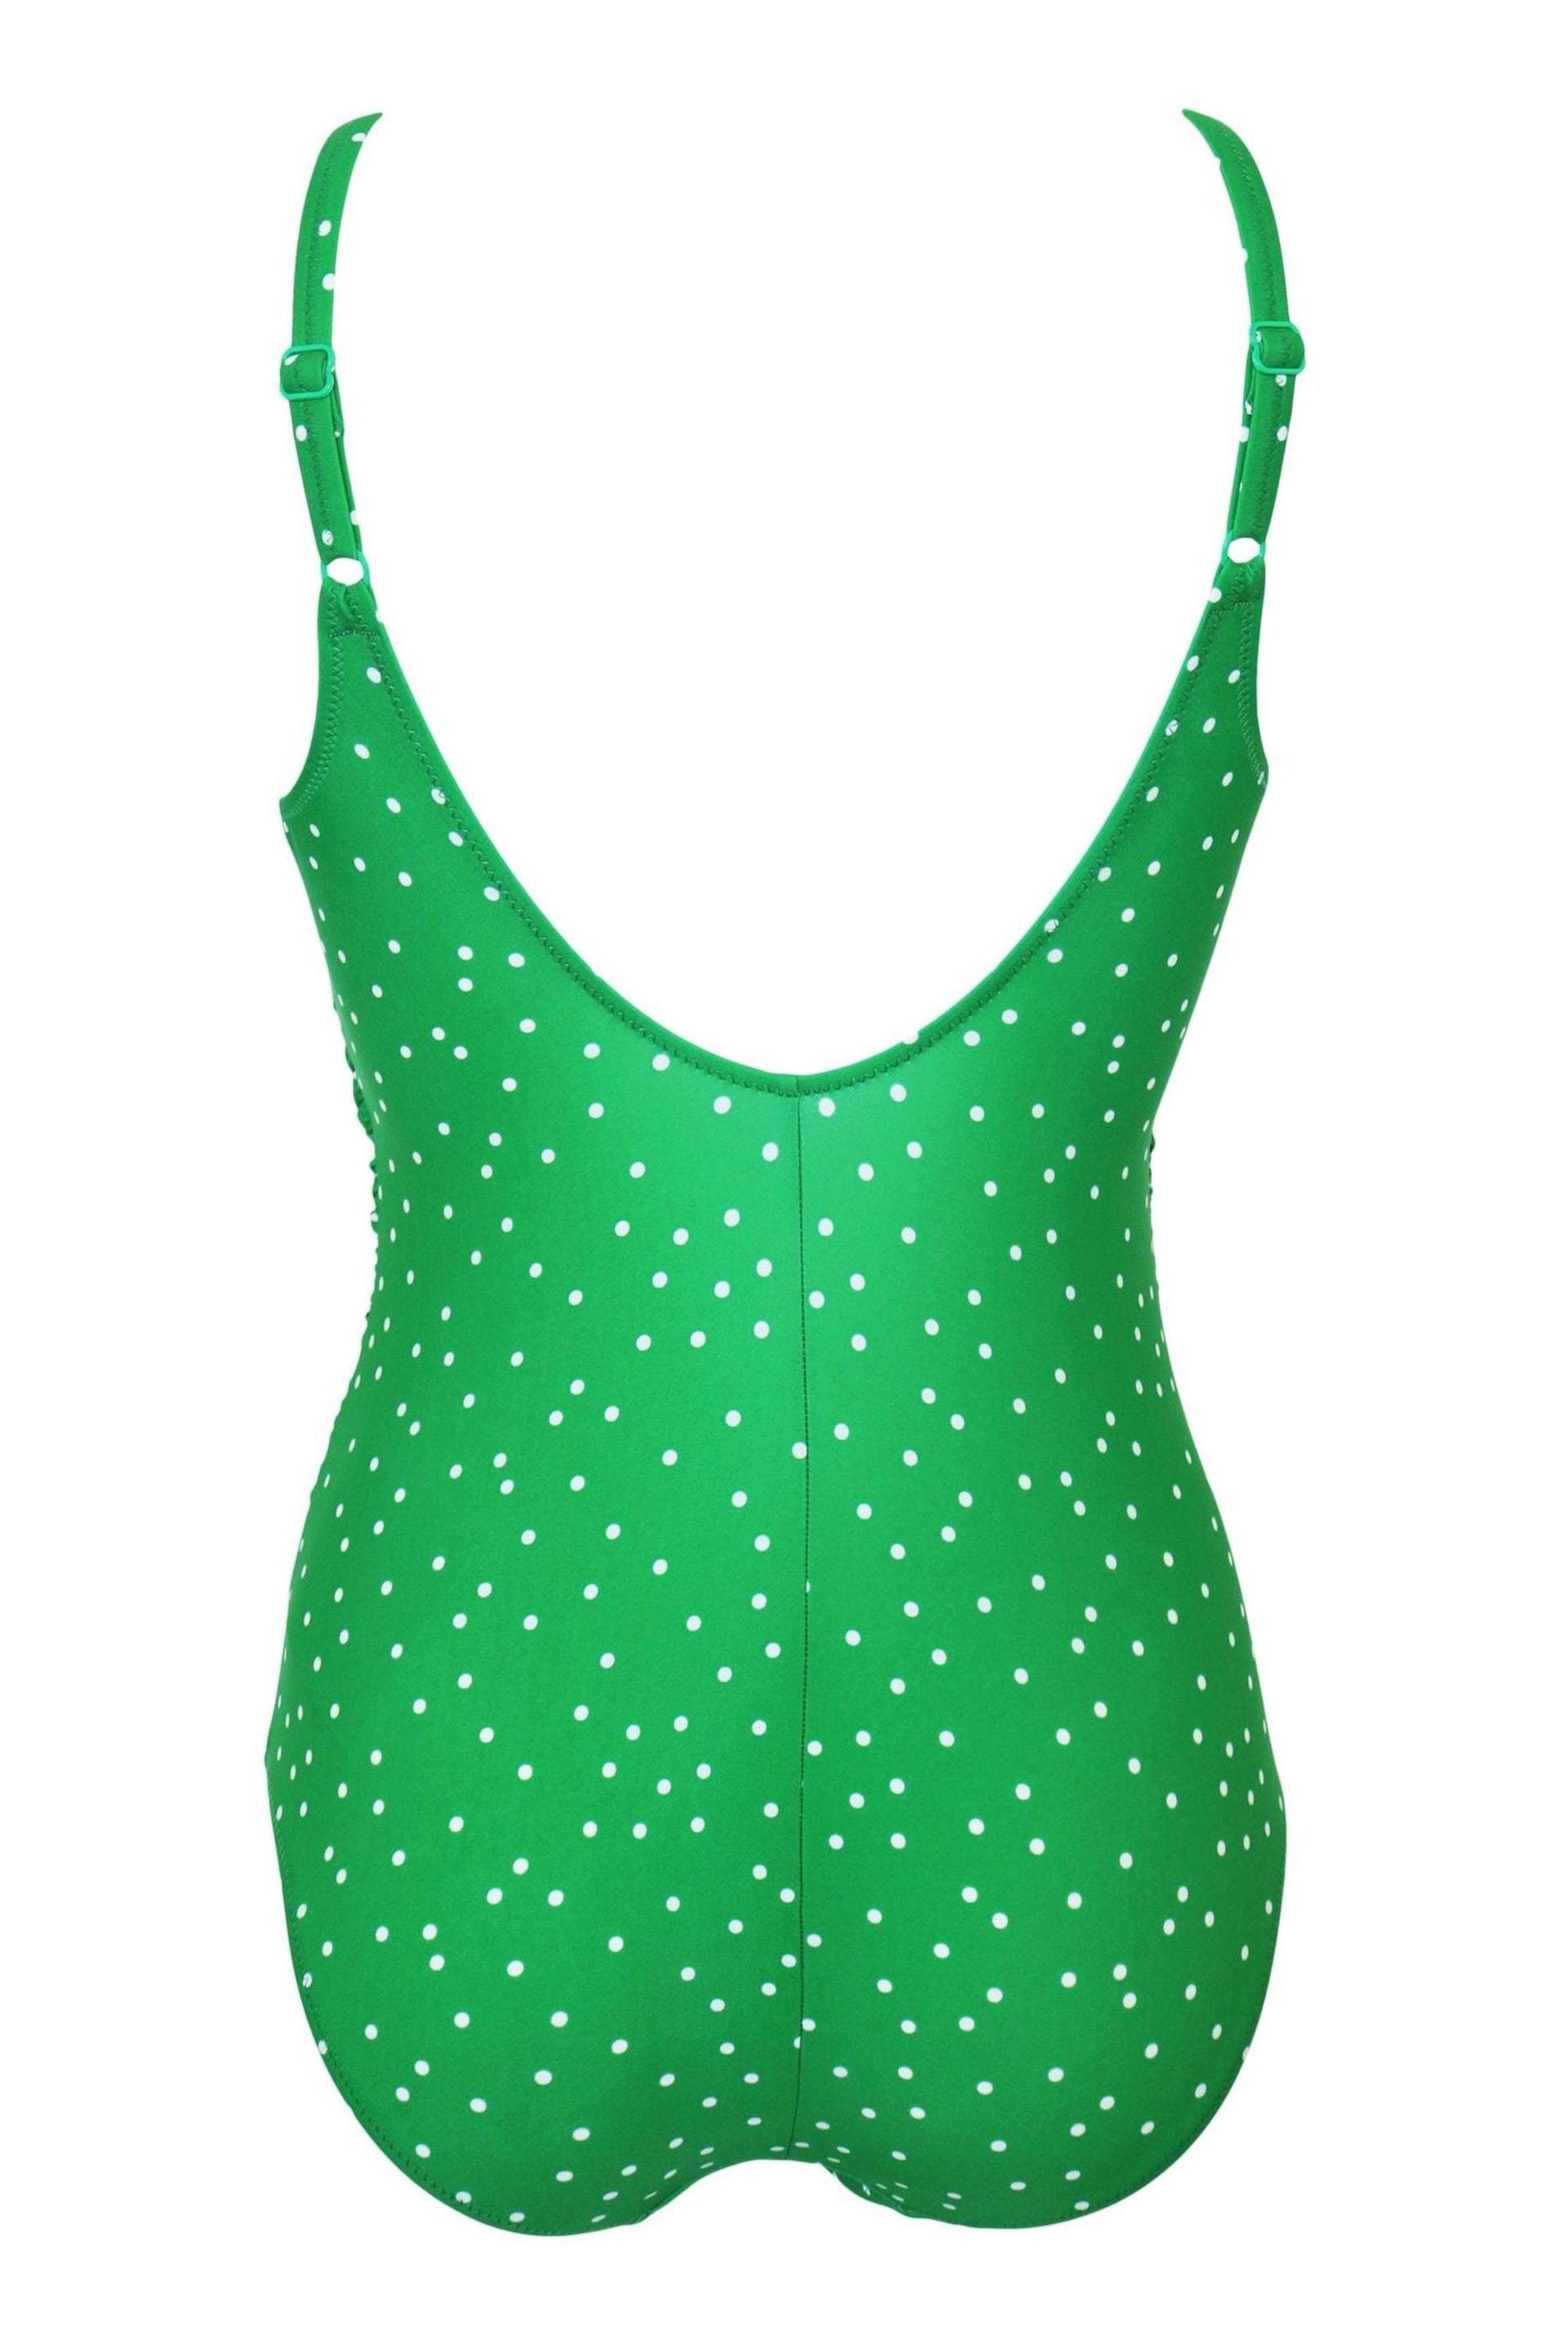 Pour Moi Green Scoop Neck Tummy Control Swimsuit - Image 4 of 4